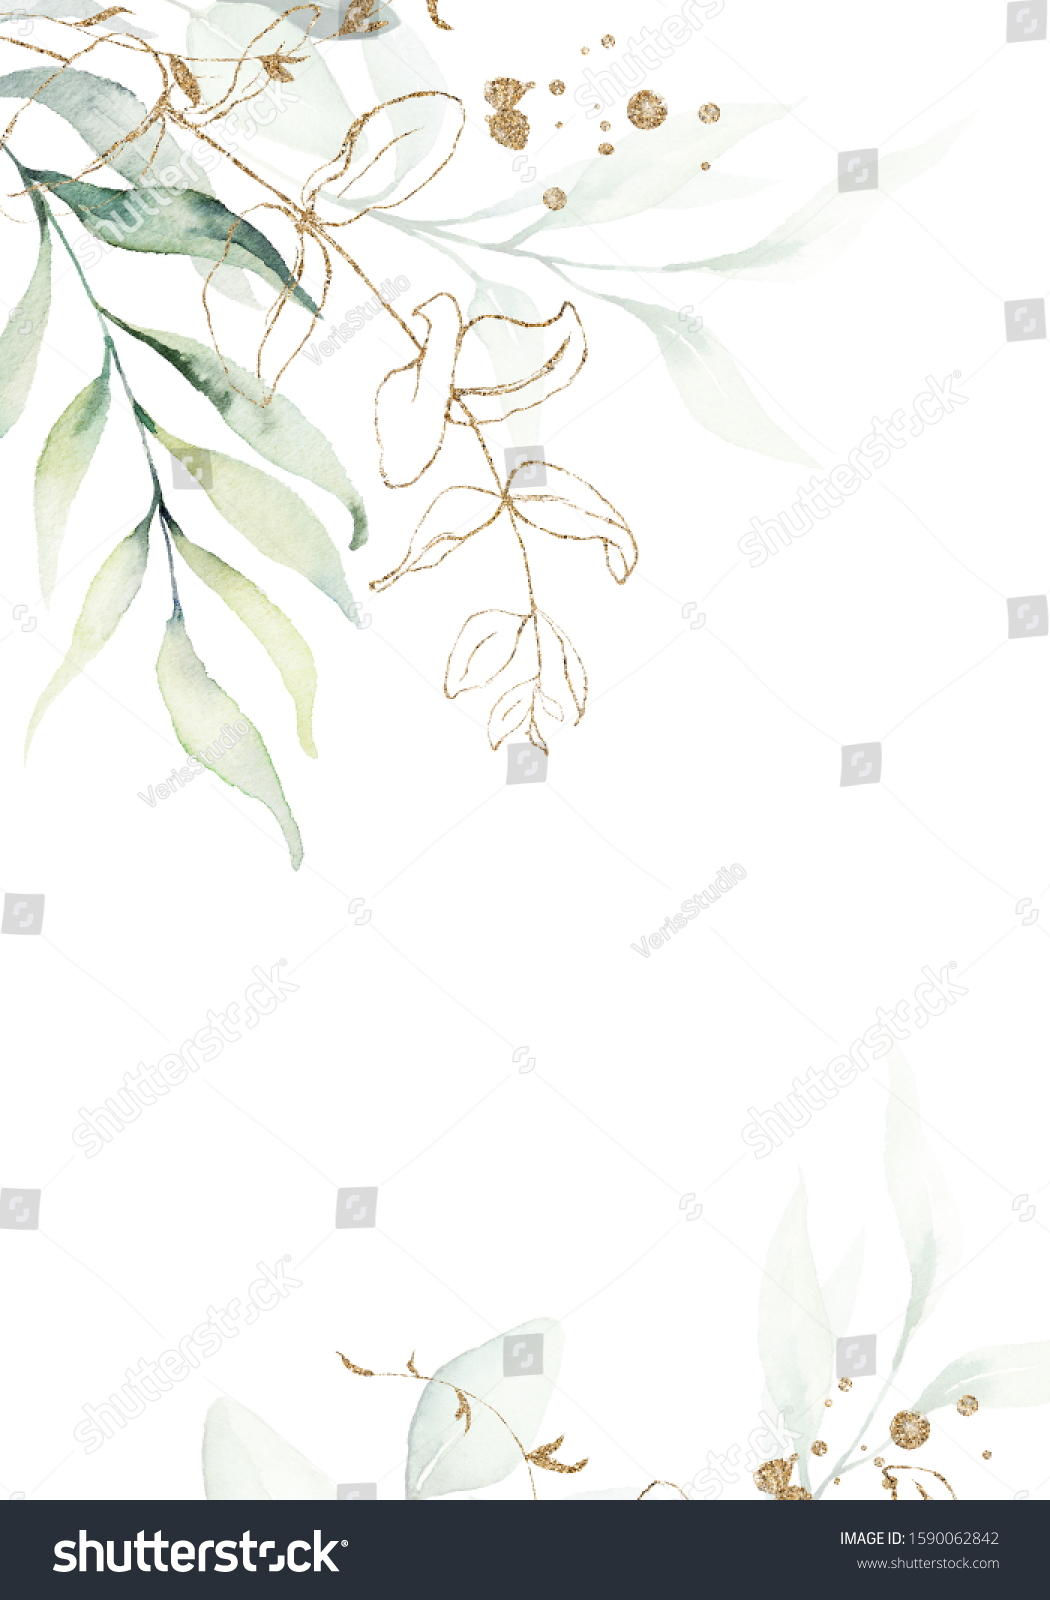 Watercolor Floral Illustration Gold Branches Green Stock Illustration ...